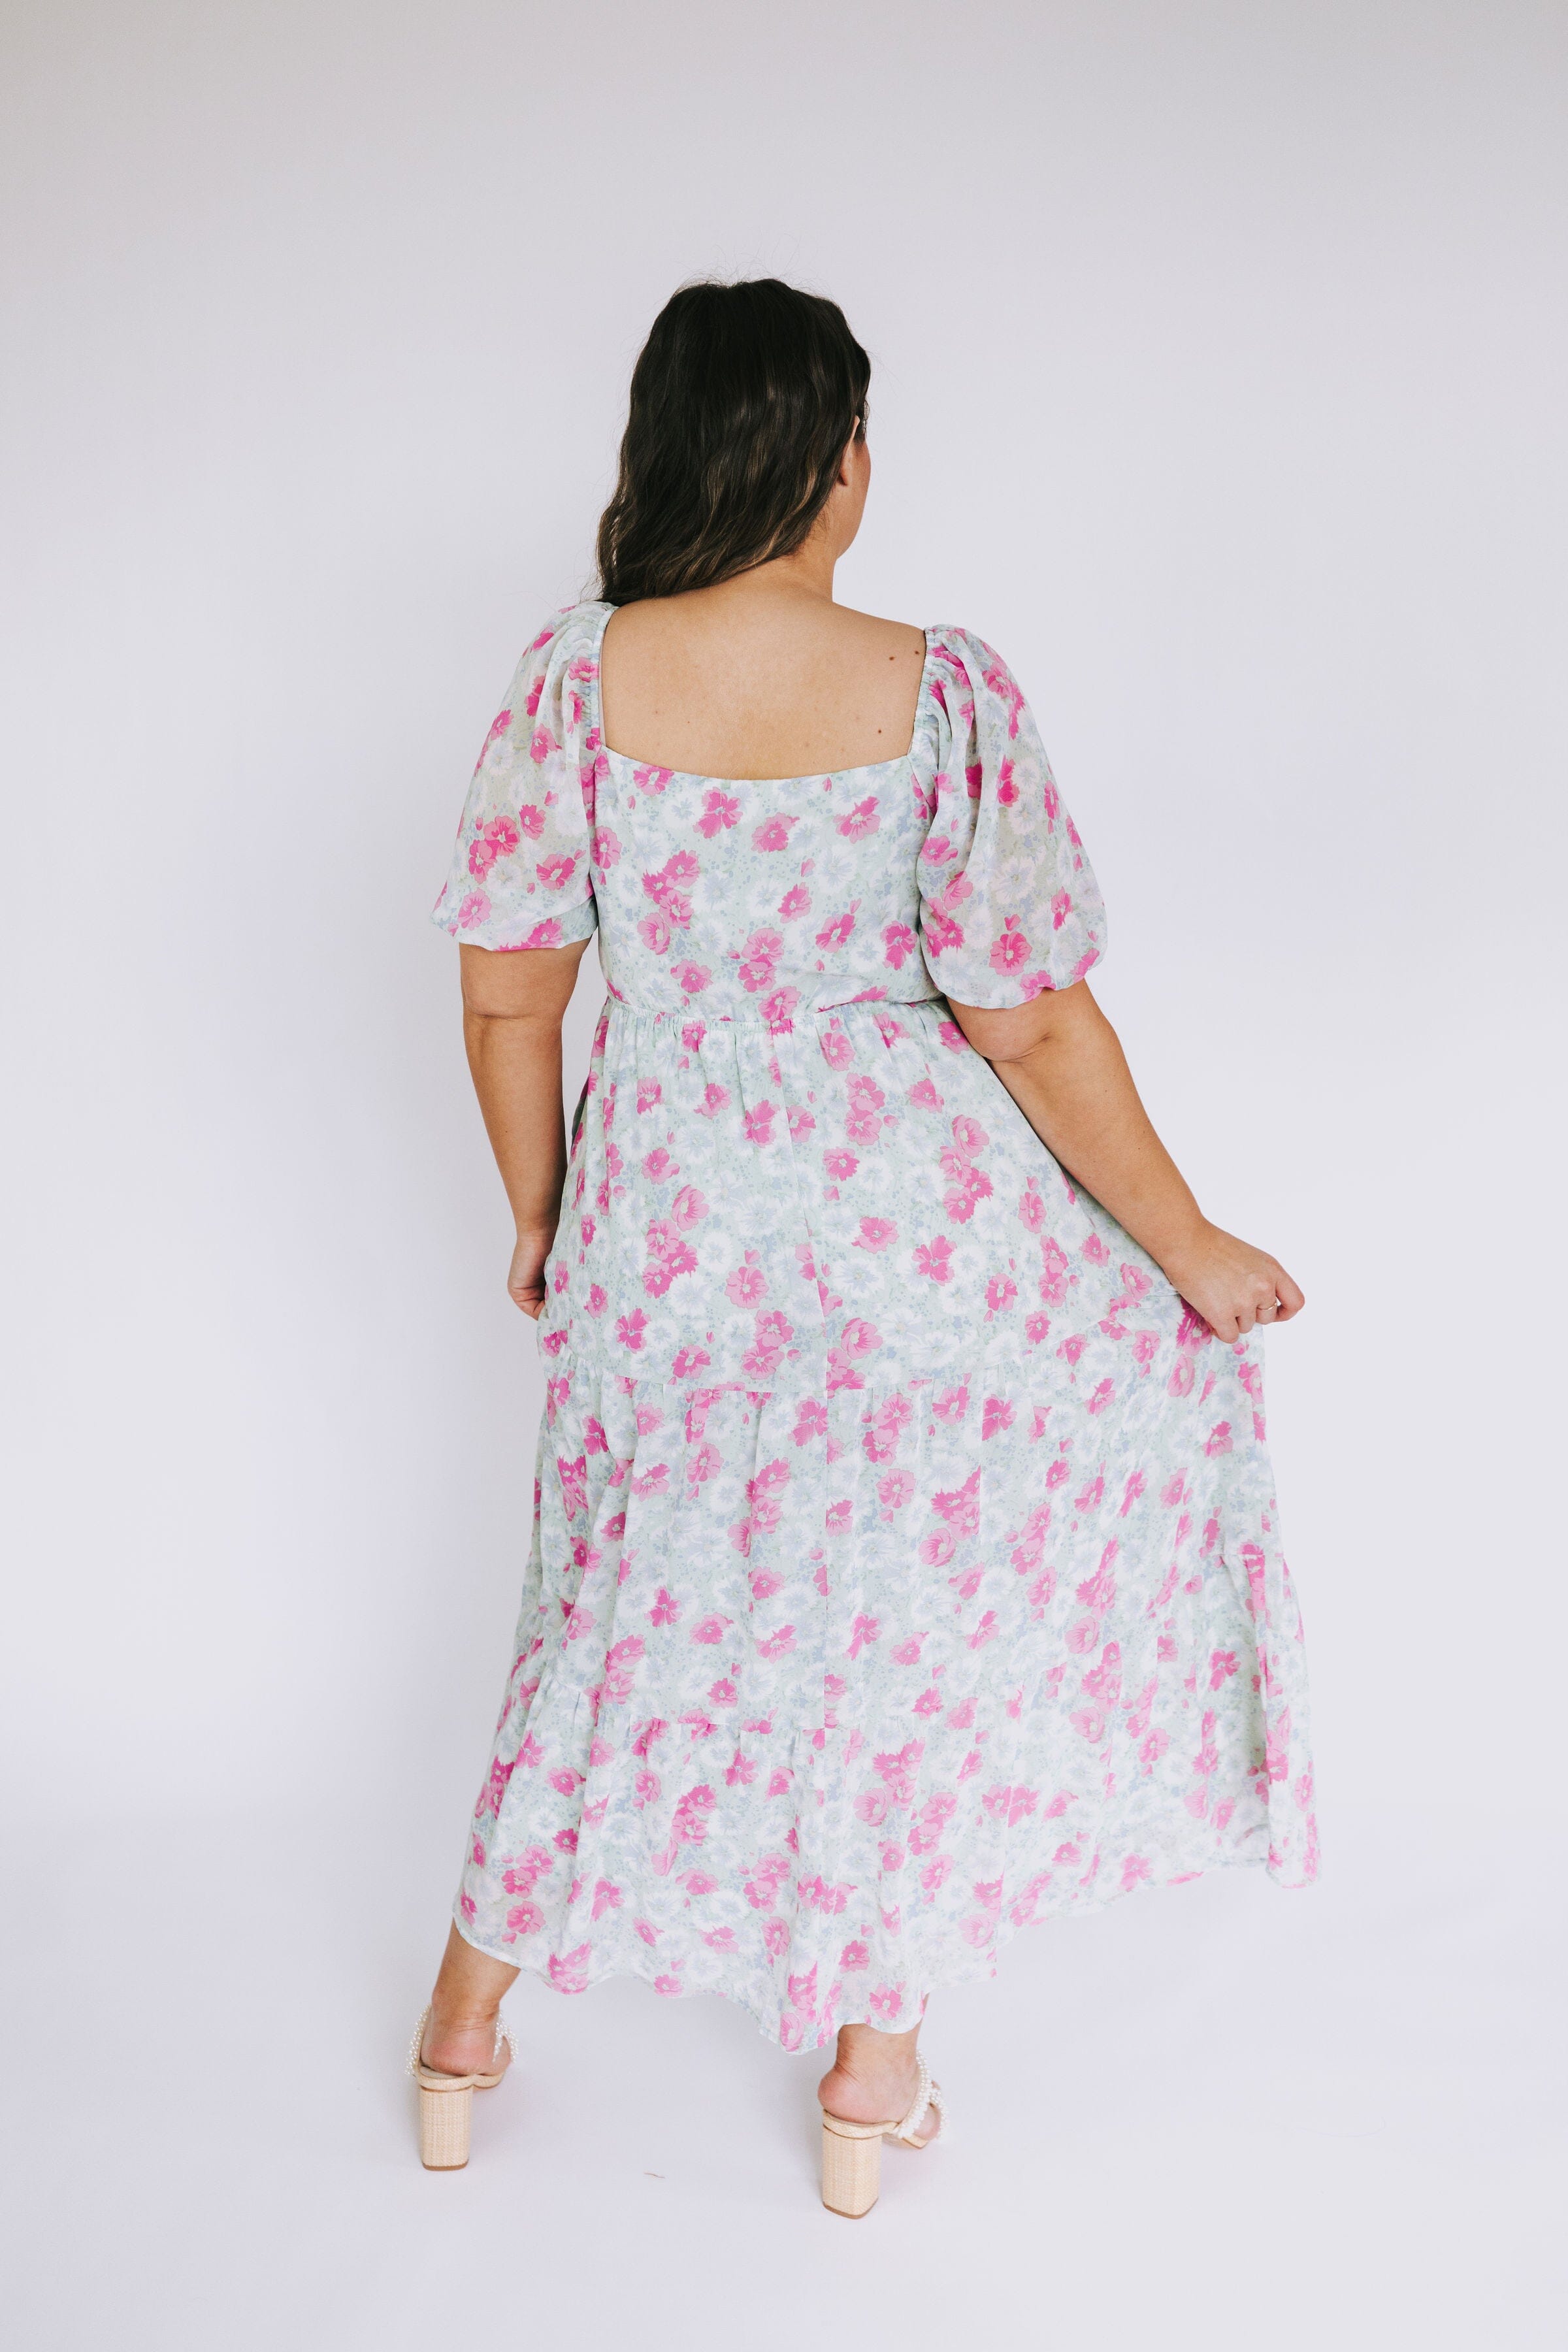 PLUS SIZE - Loved By You Dress